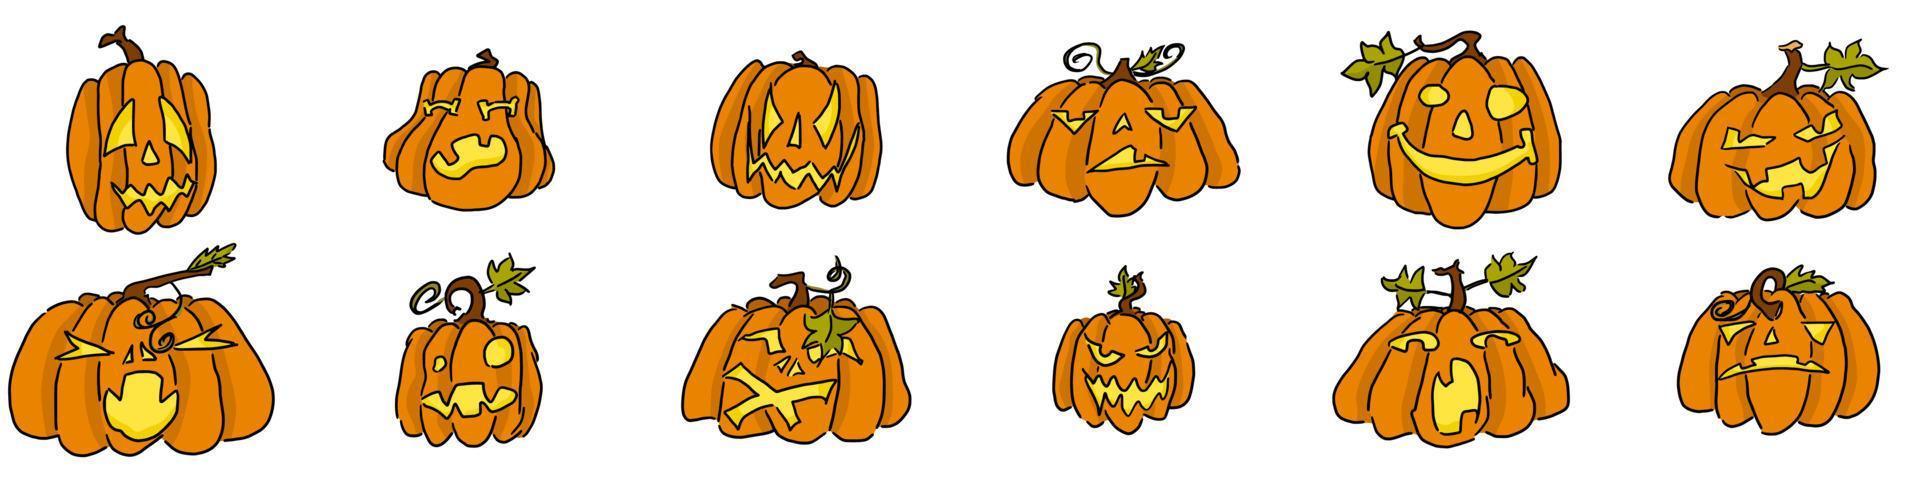 doodle pumpkins selection on white funny monsters vector